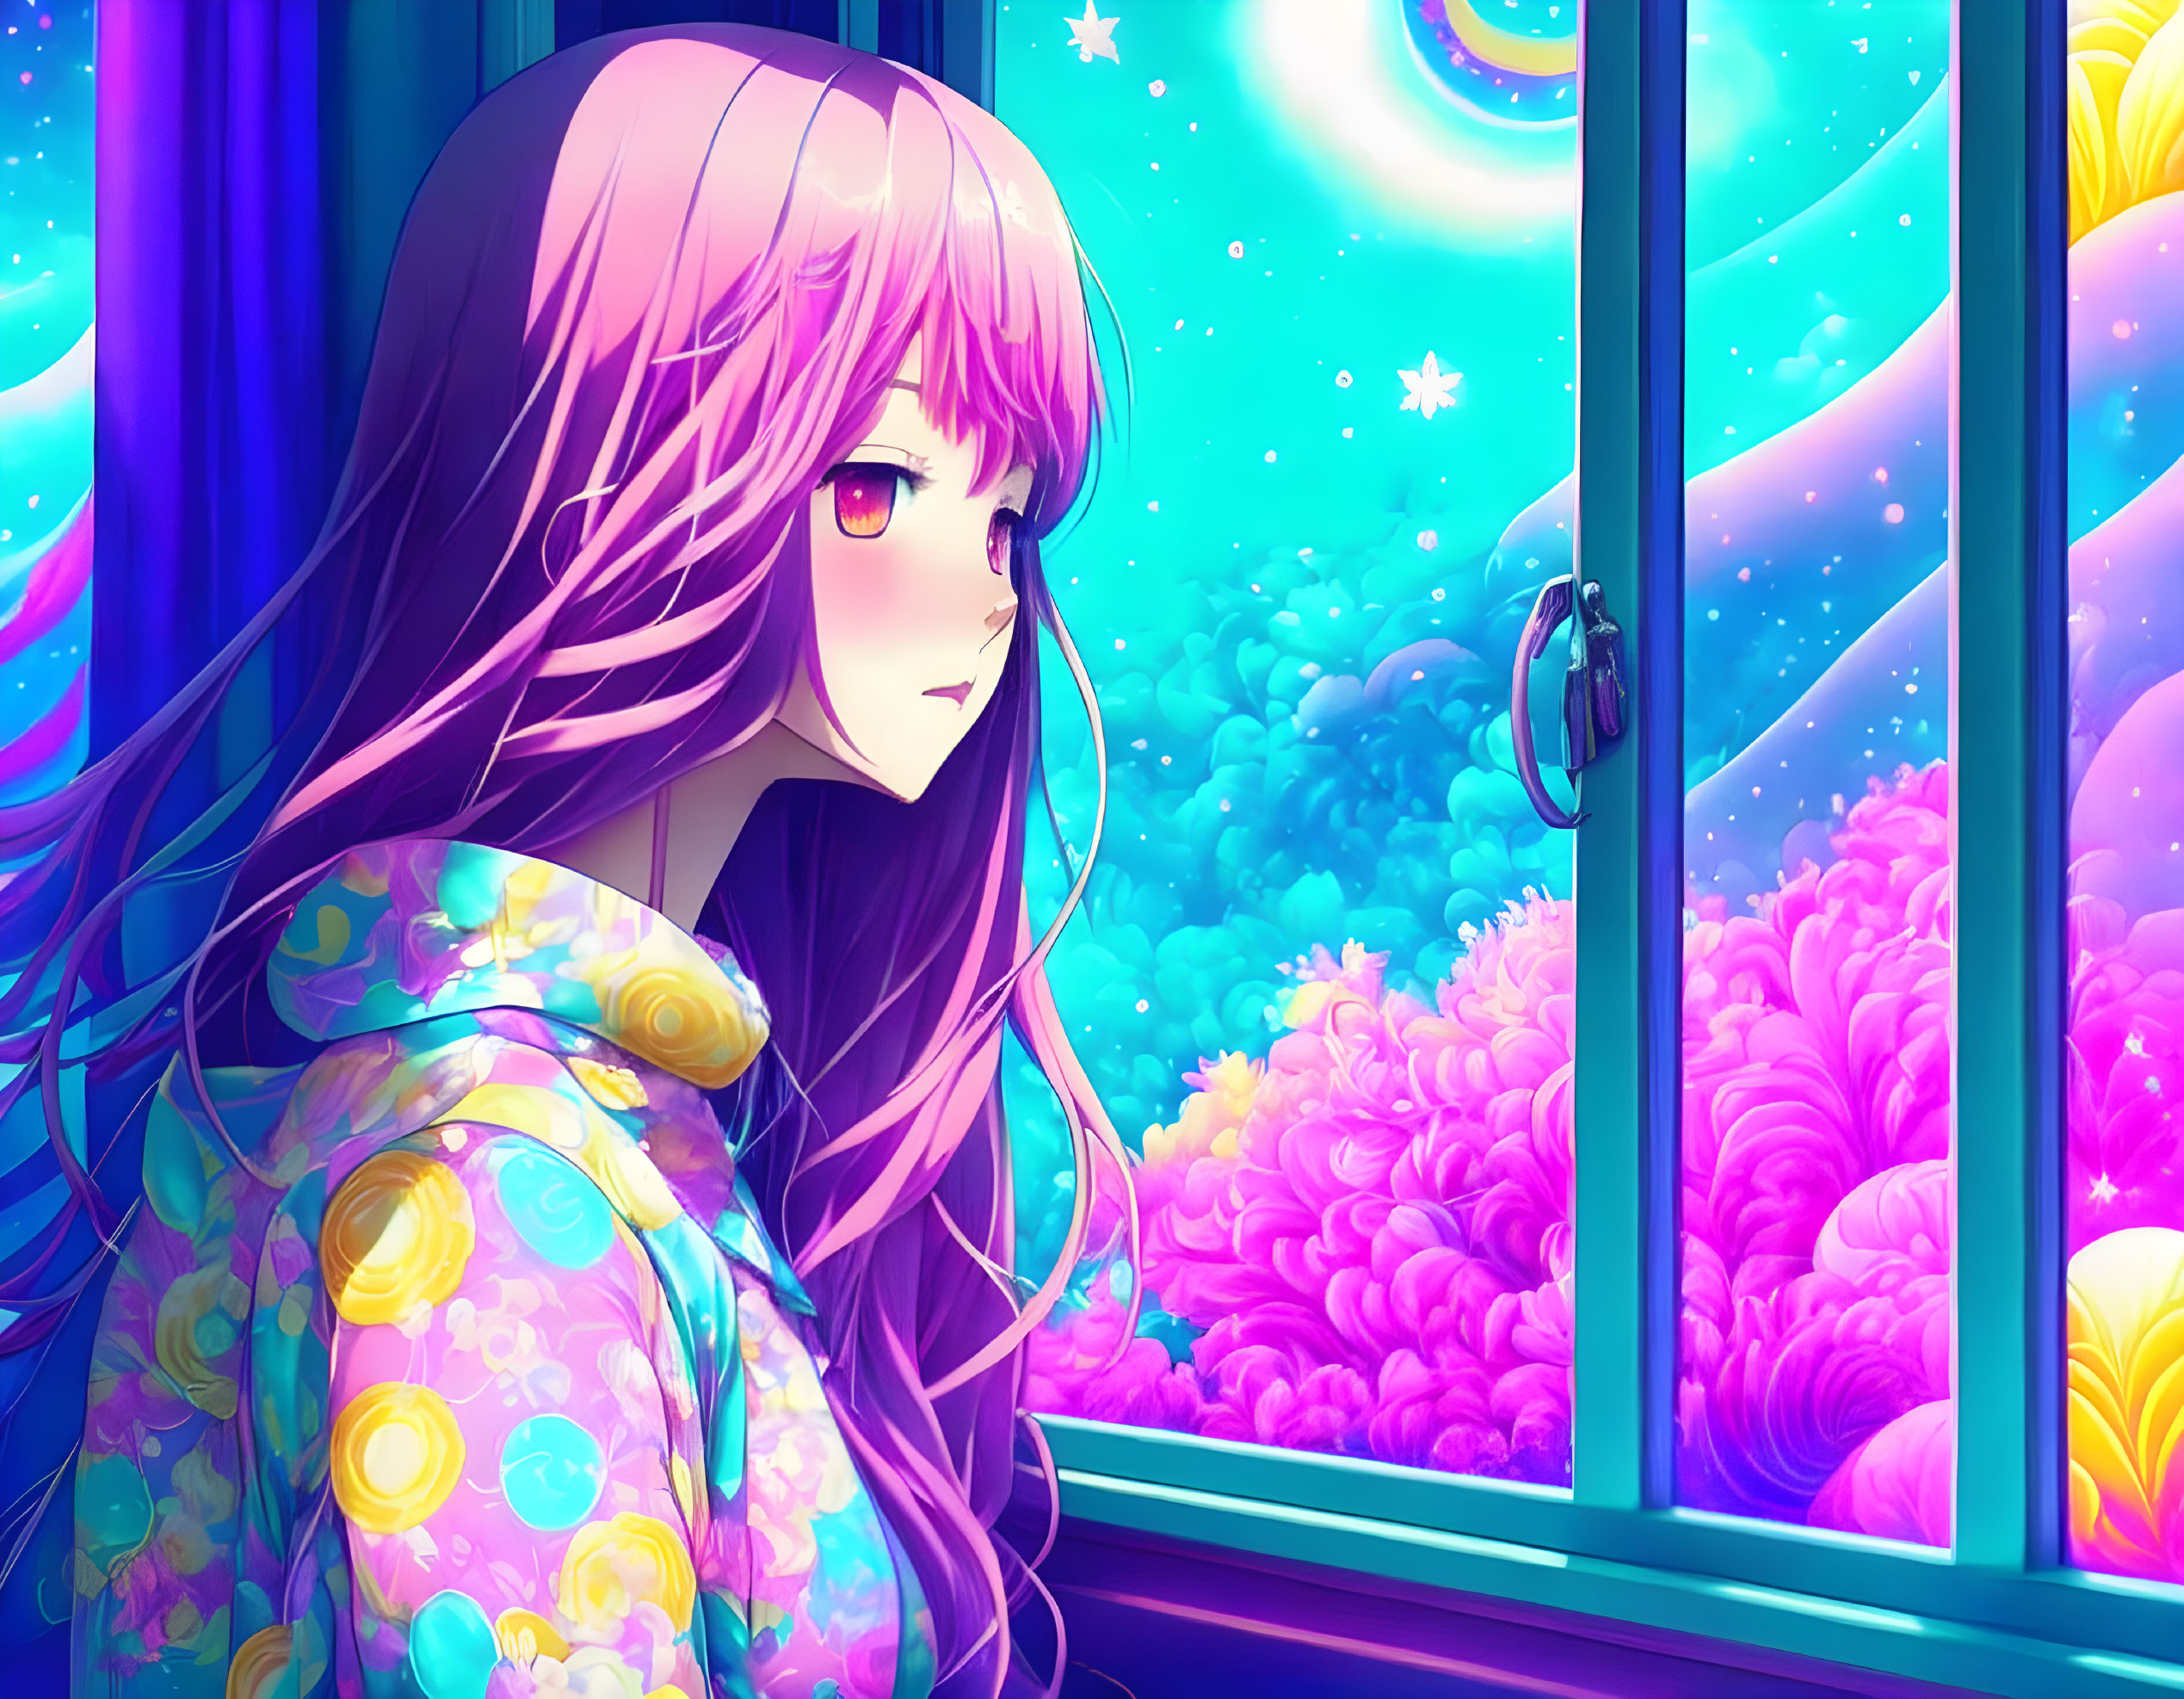 Vibrant anime girl with purple hair in fantasy nightscape